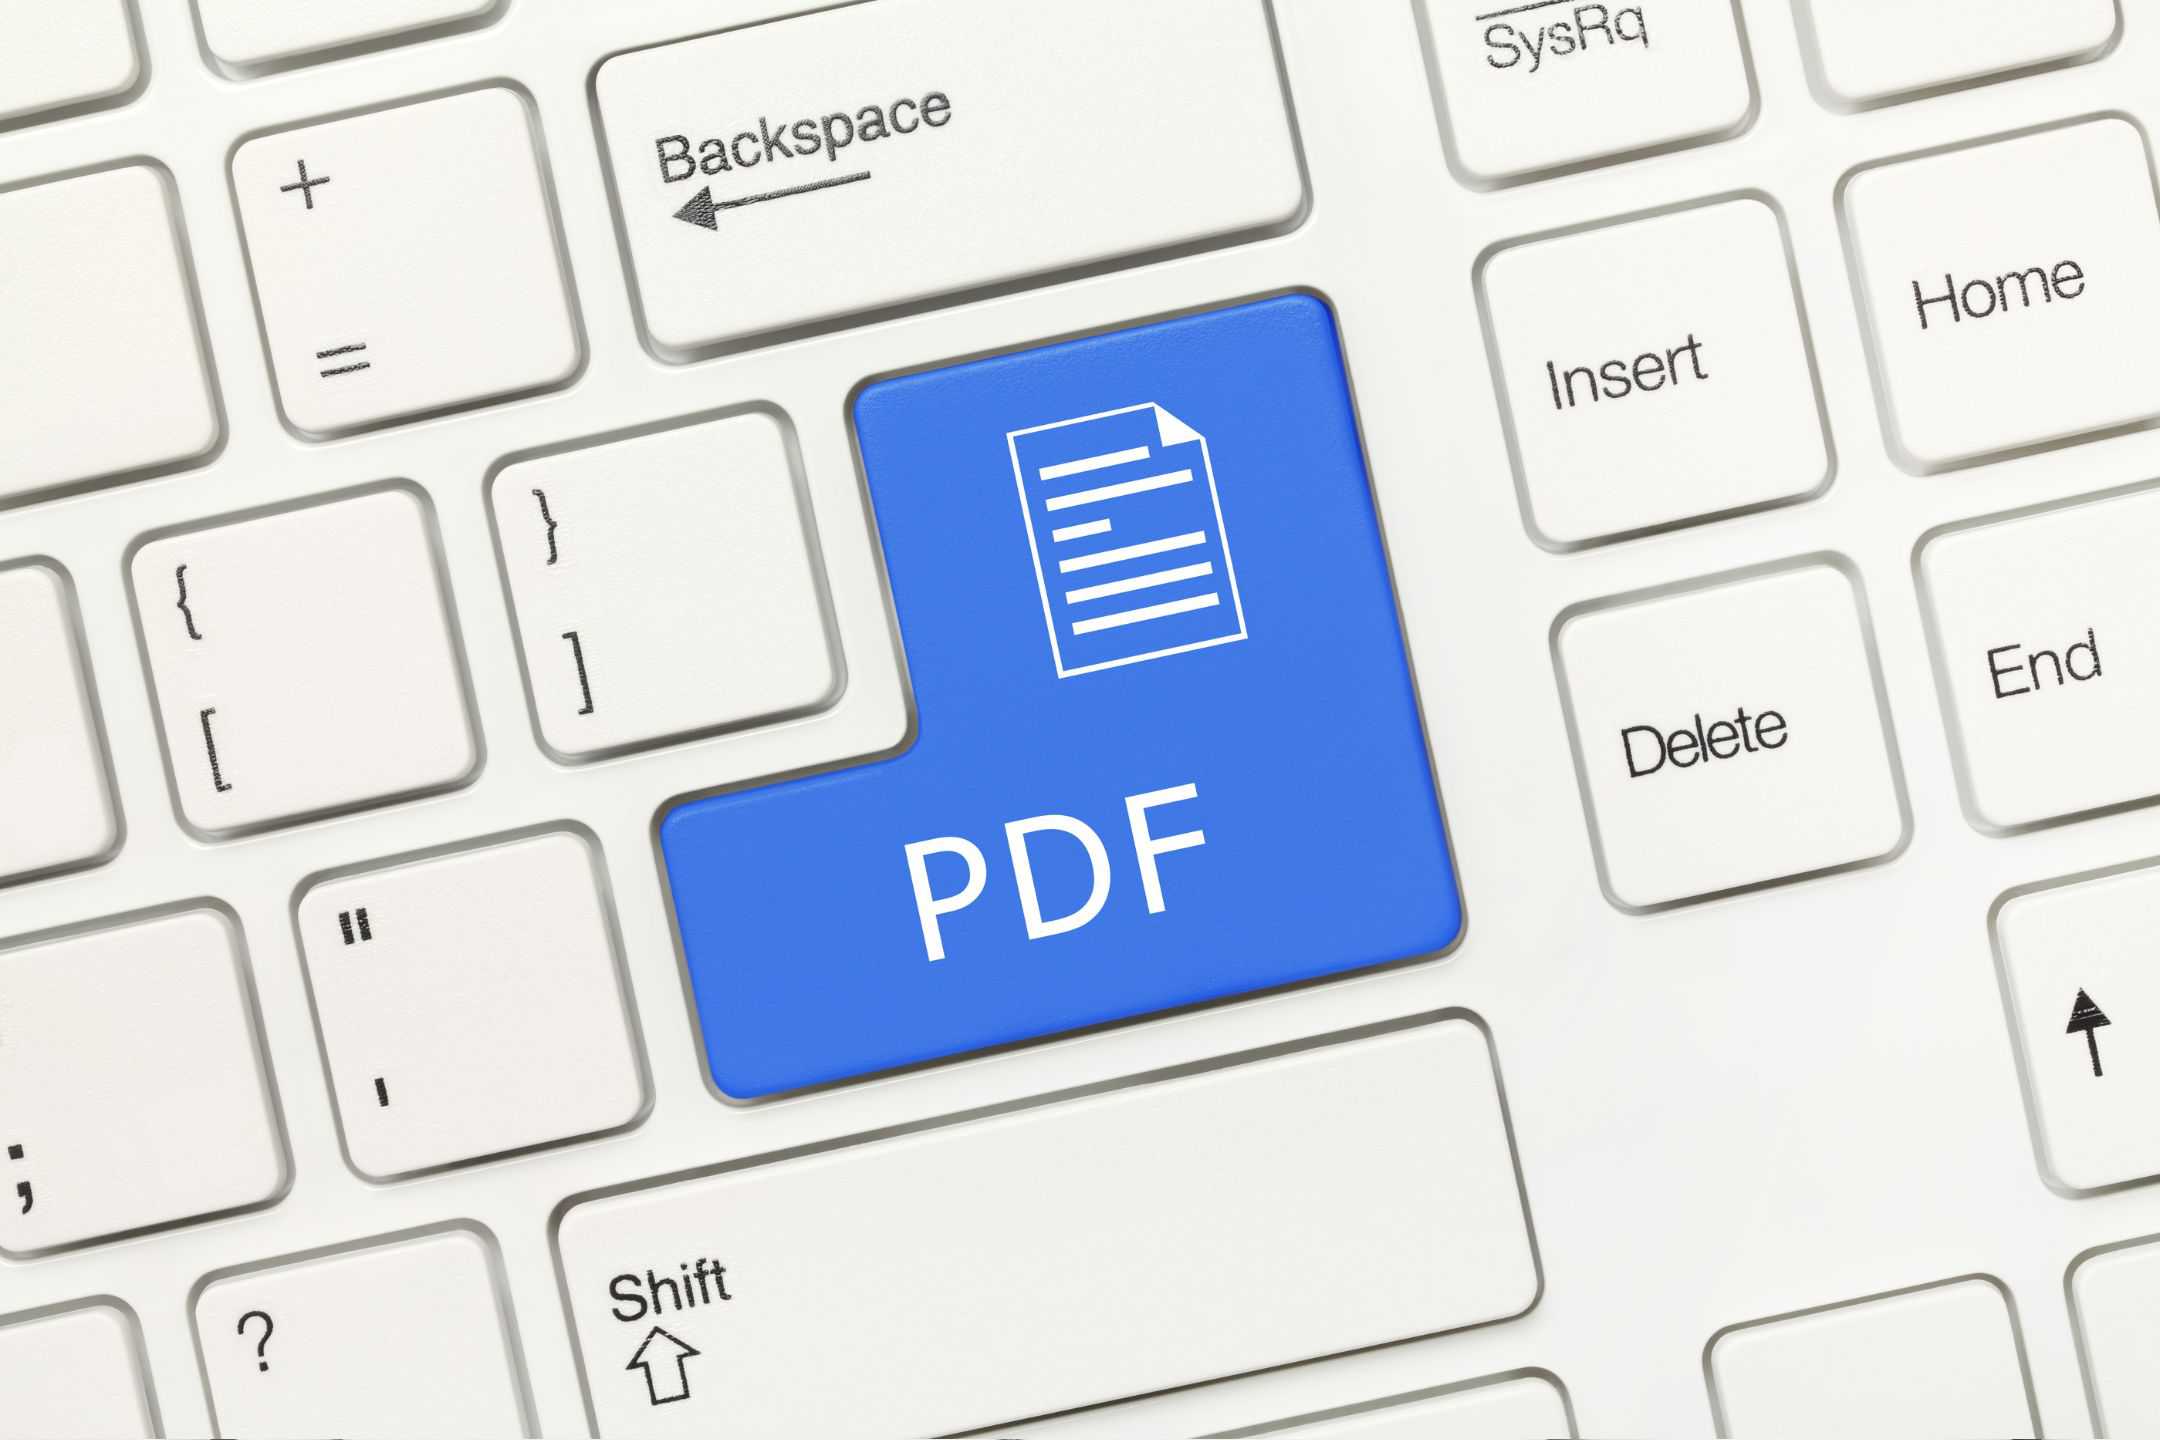 enter key on keyboard replaced with pdf